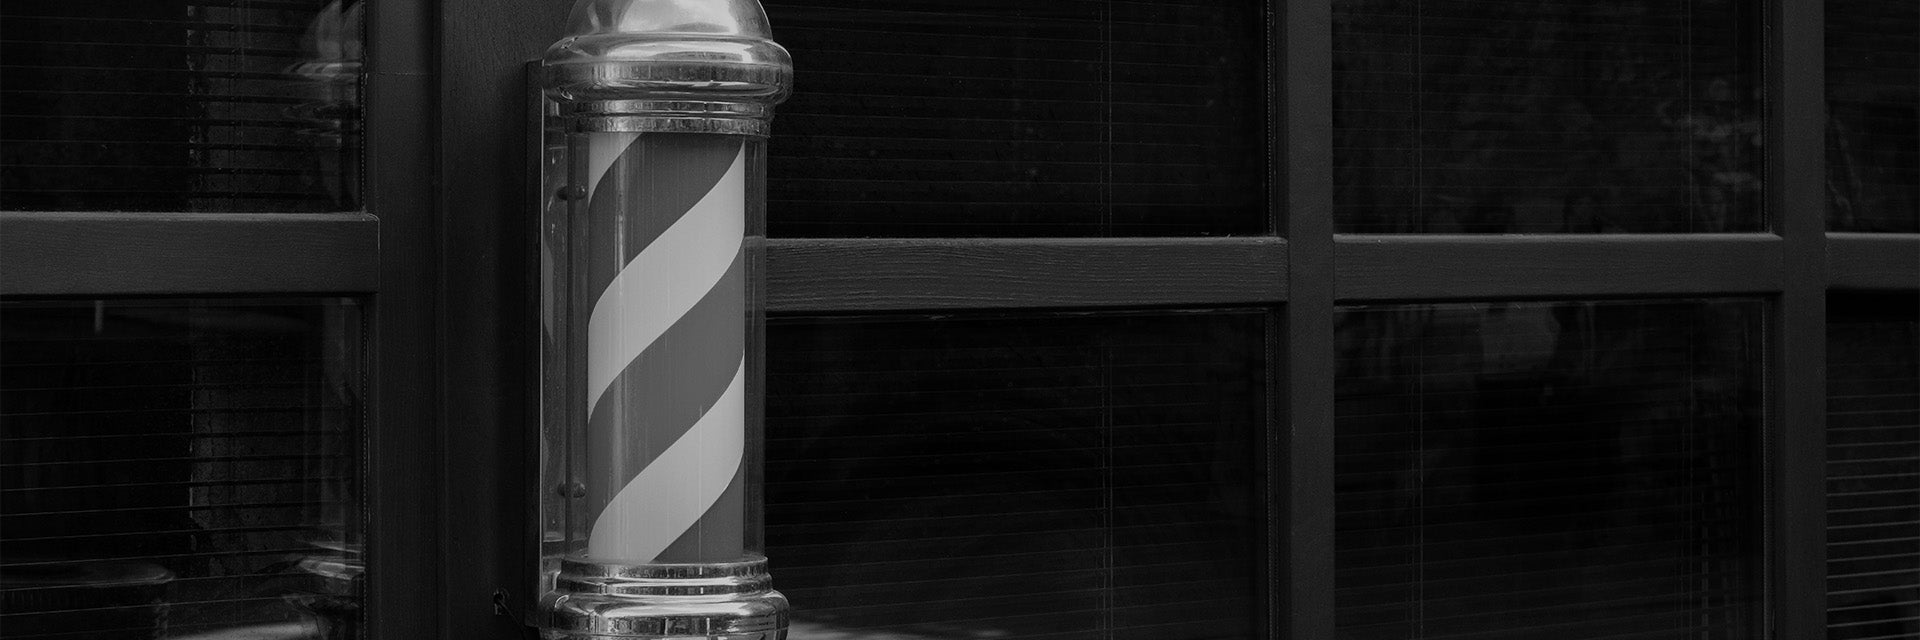 Barber Pole & Signs